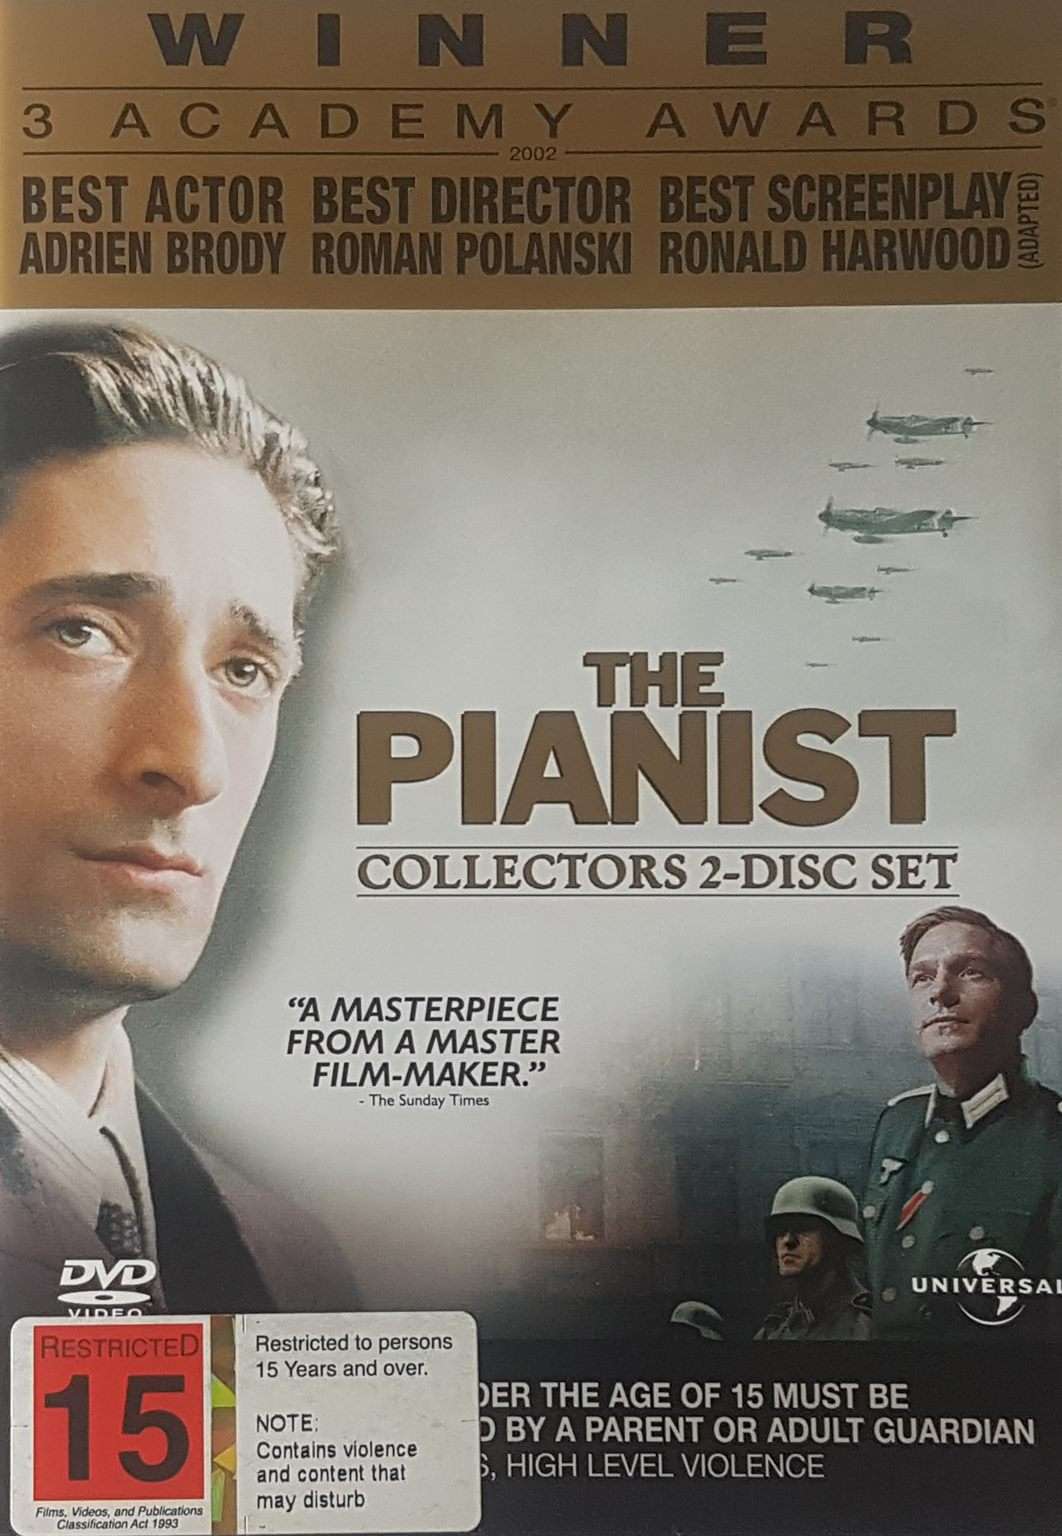 The Pianist Two Disc Collectors Set